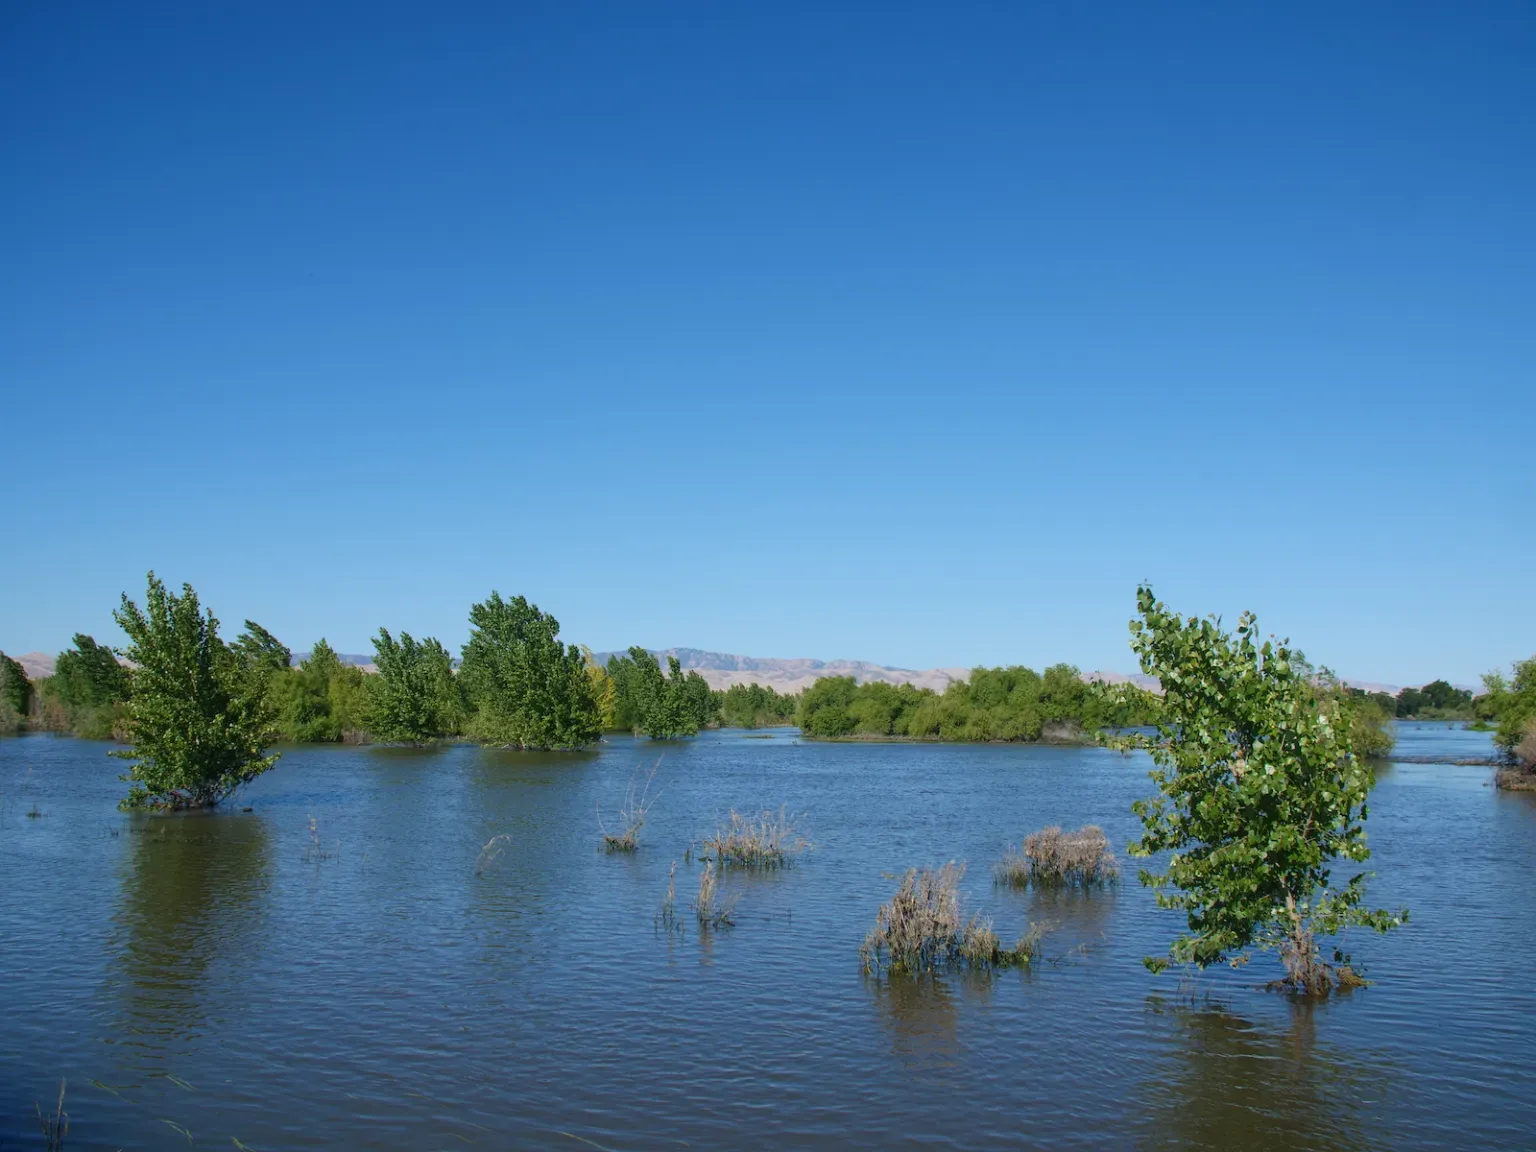 Trees surrounded by floodwaters with bright blue sky above and mountains in the distance